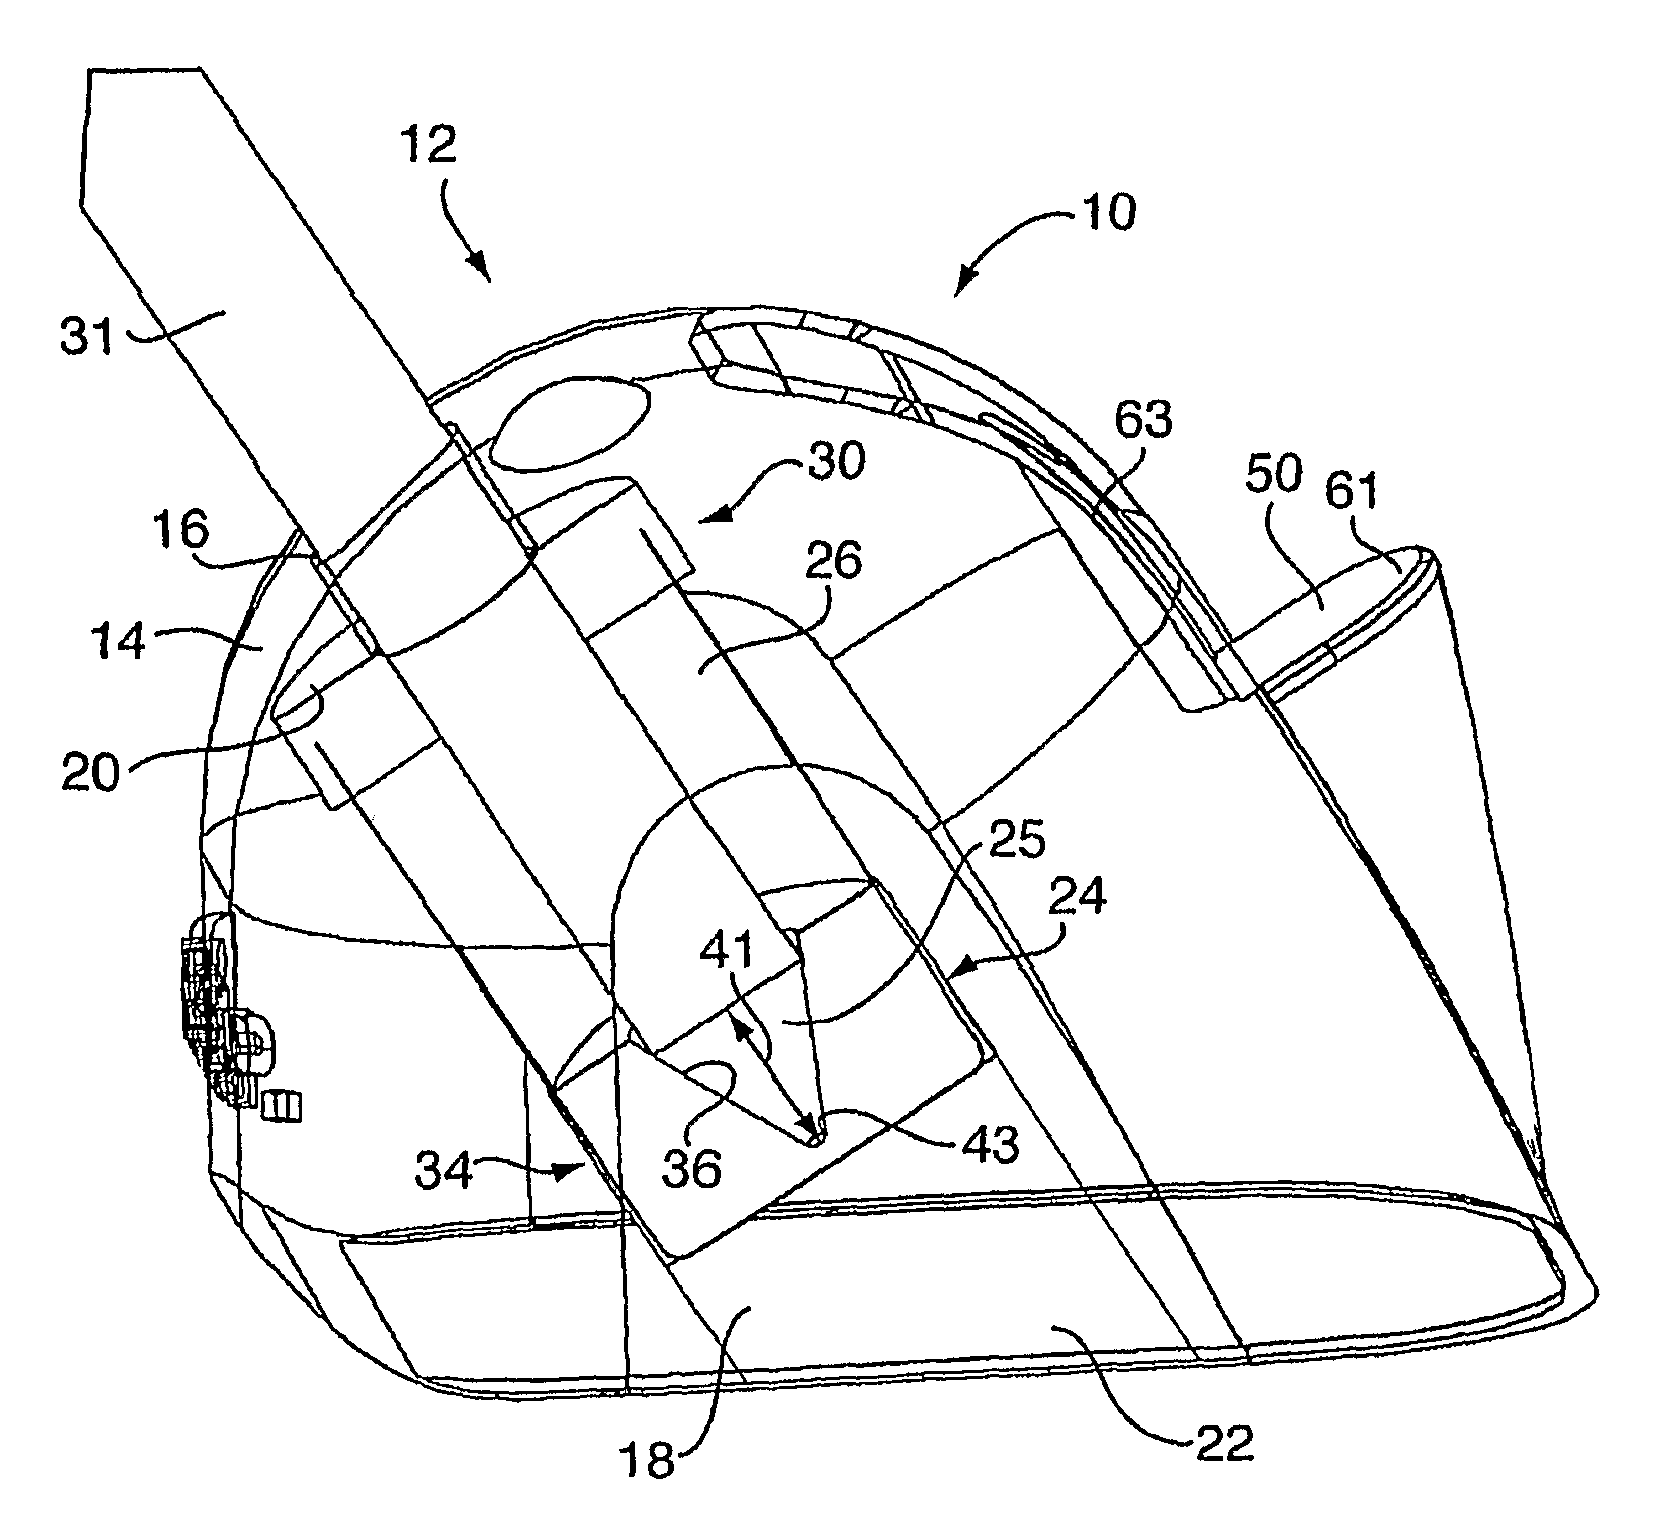 Device for white balancing and appying an anti-fog agent to medical videoscopes prior to medical procedures